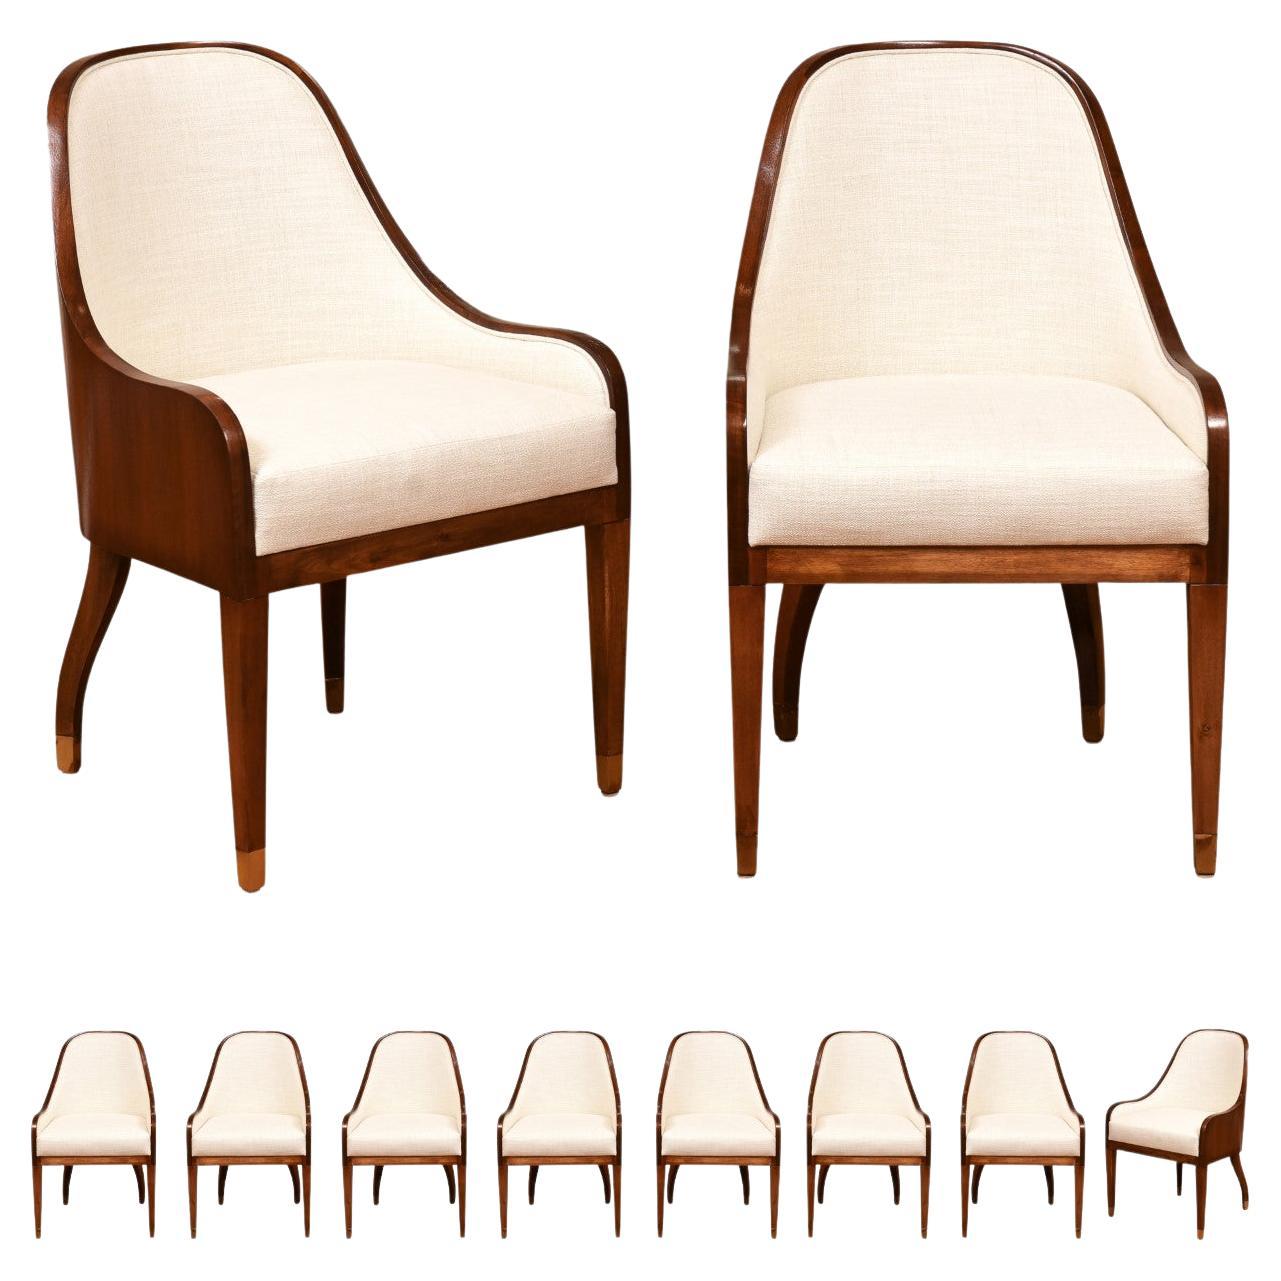 Spectacular Set of 10 Art Deco Revival Chairs in Bookmatch Figured Walnut For Sale